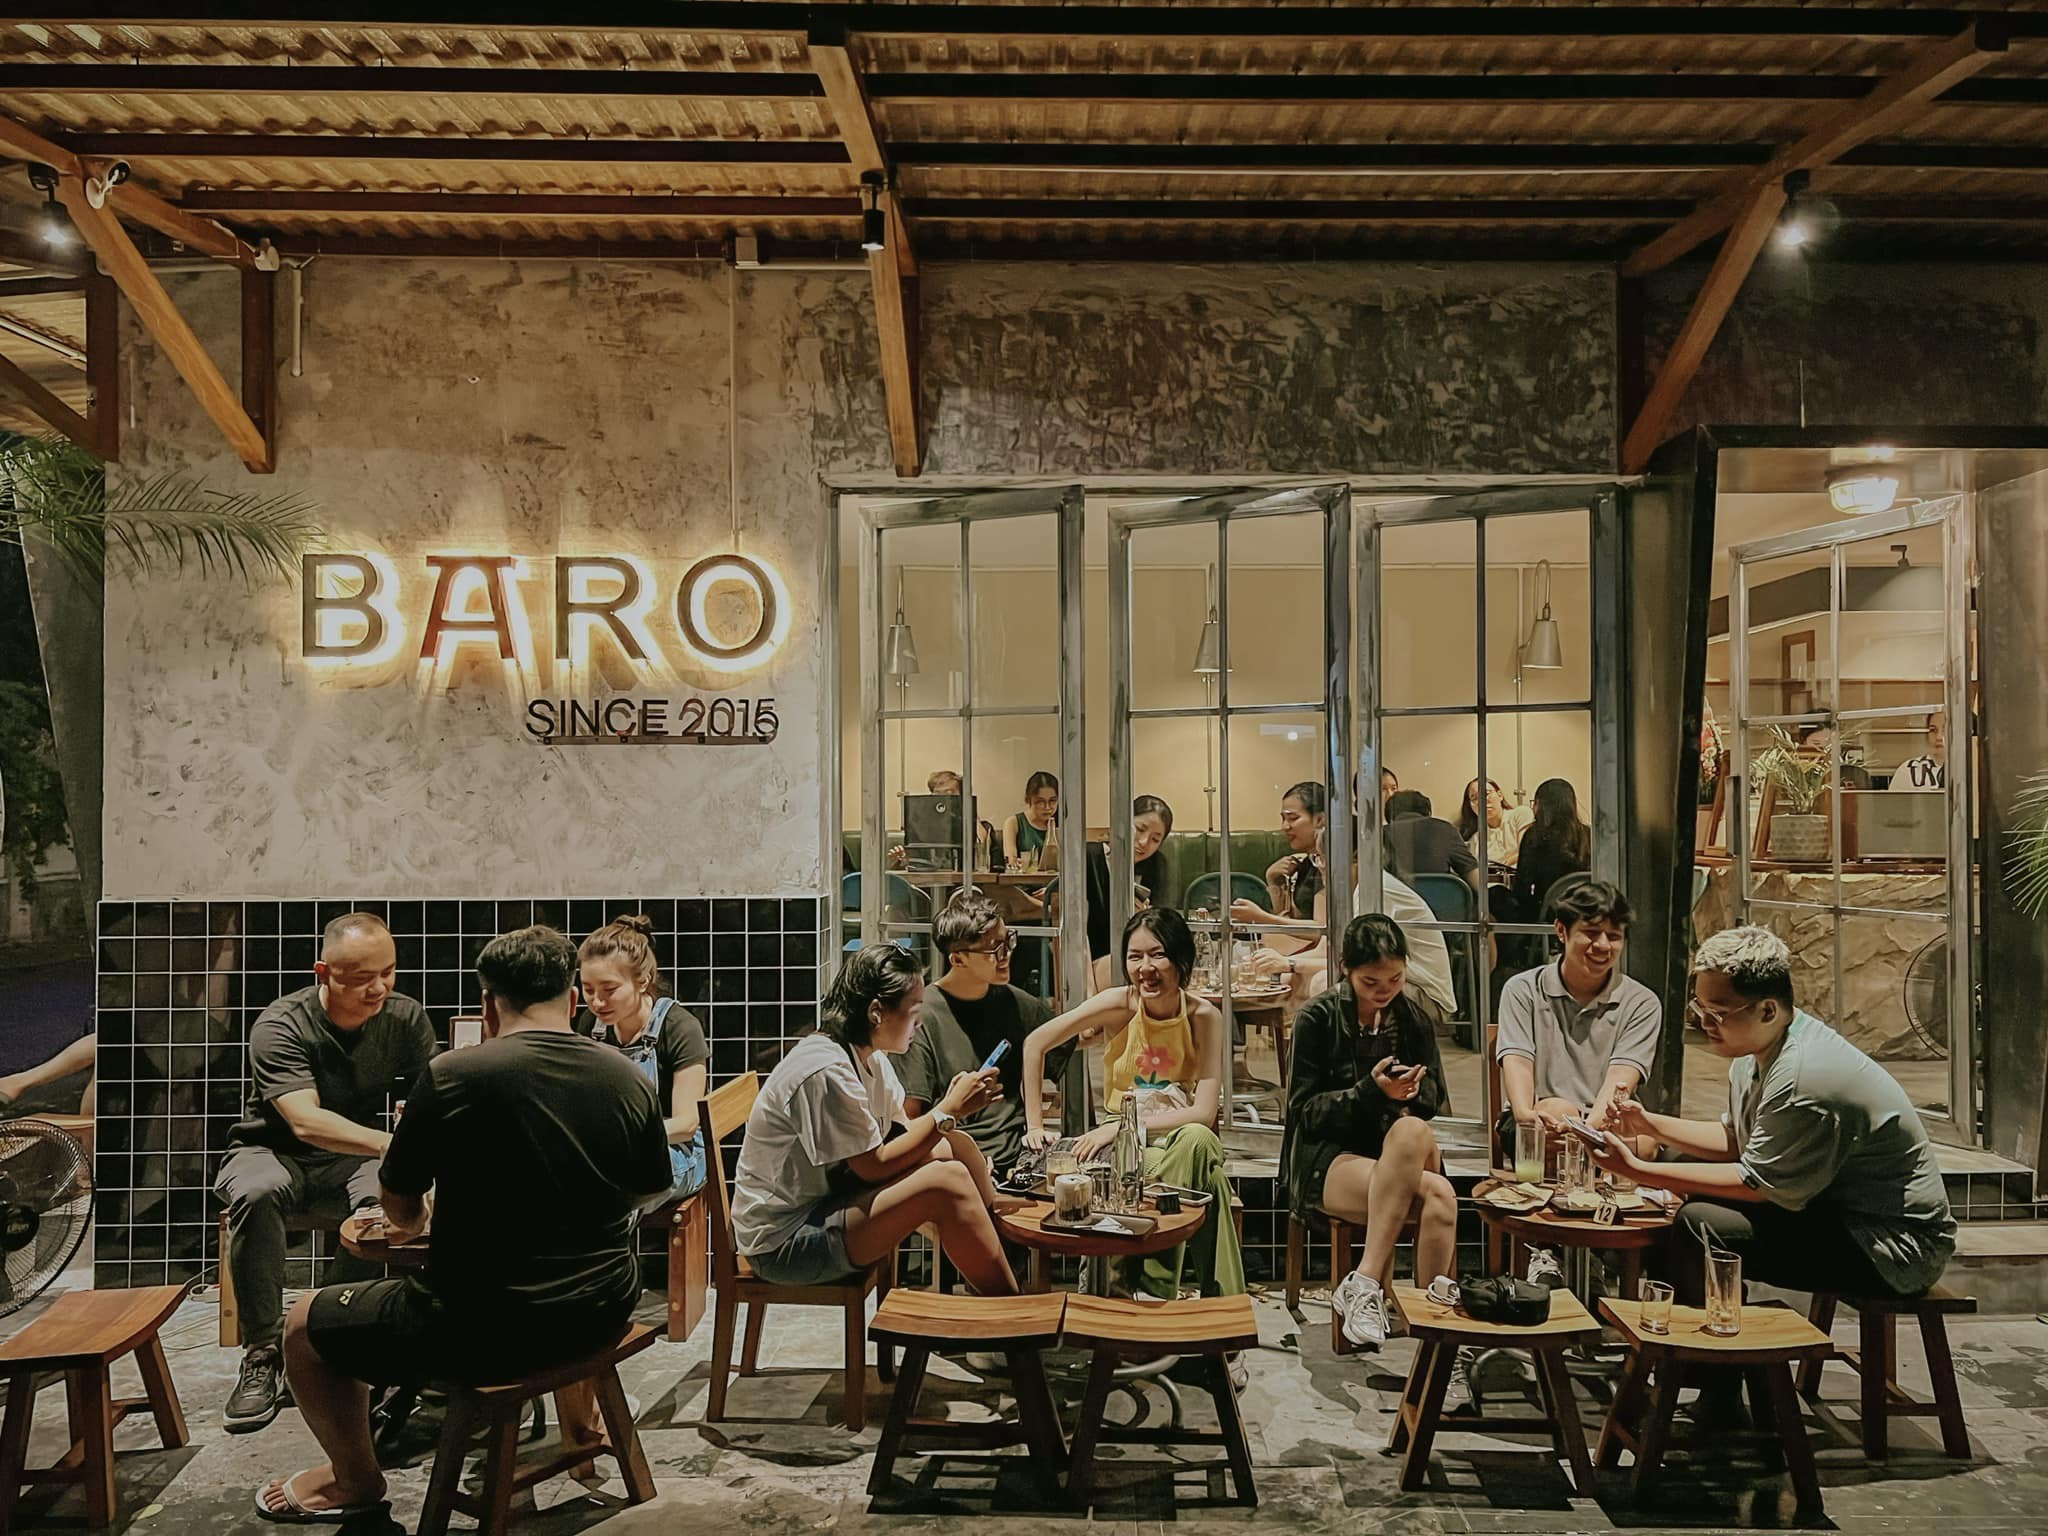 The sidewalk coffee space in Baro is loved by many young customers. Photo: H.L